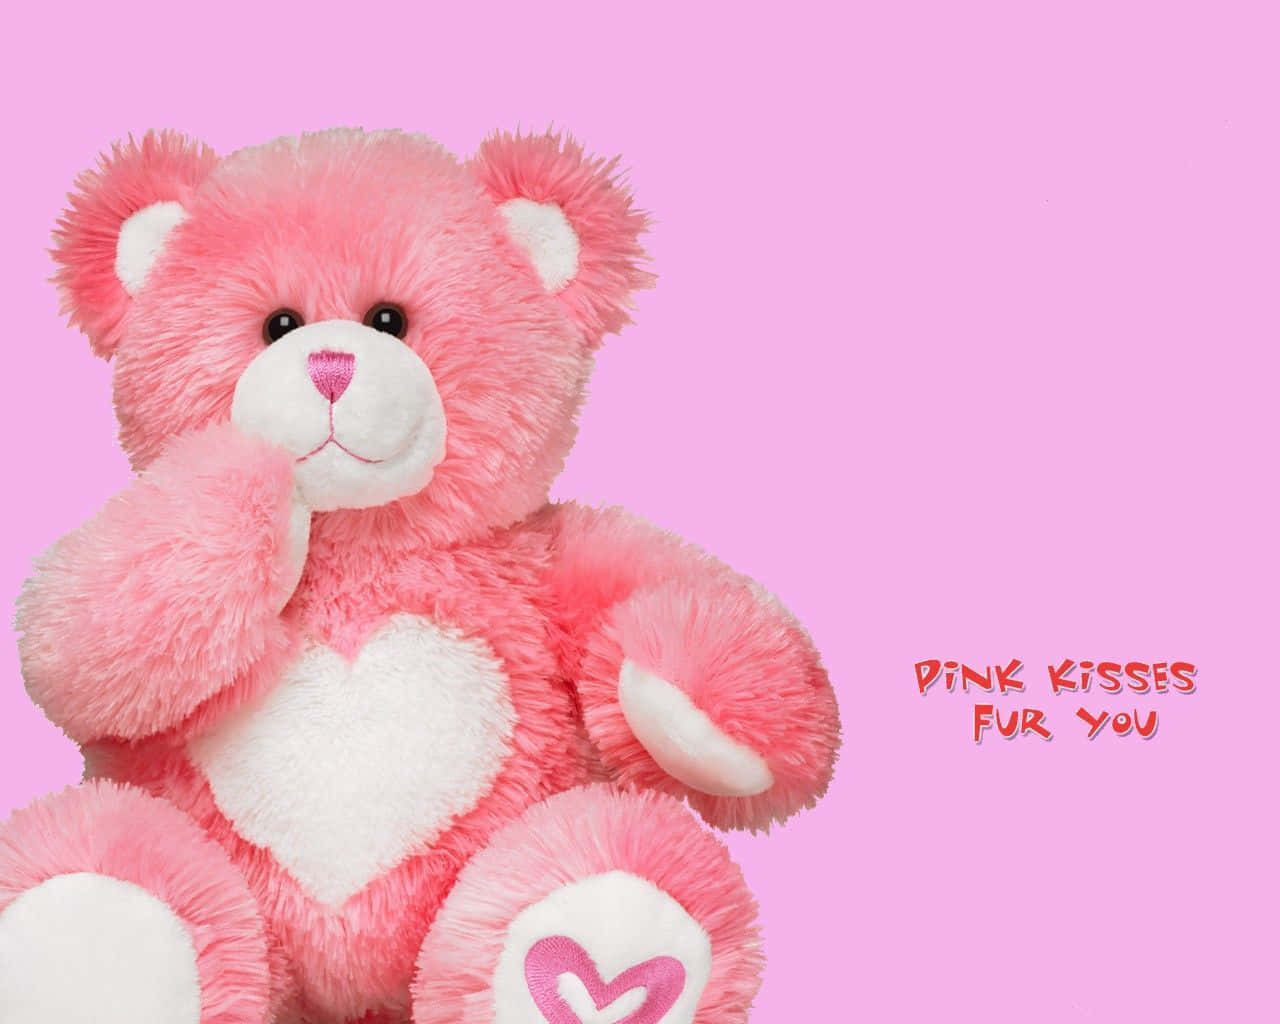 Cute Pink Teddy Bear Kisses Valentine's Day Wallpaper